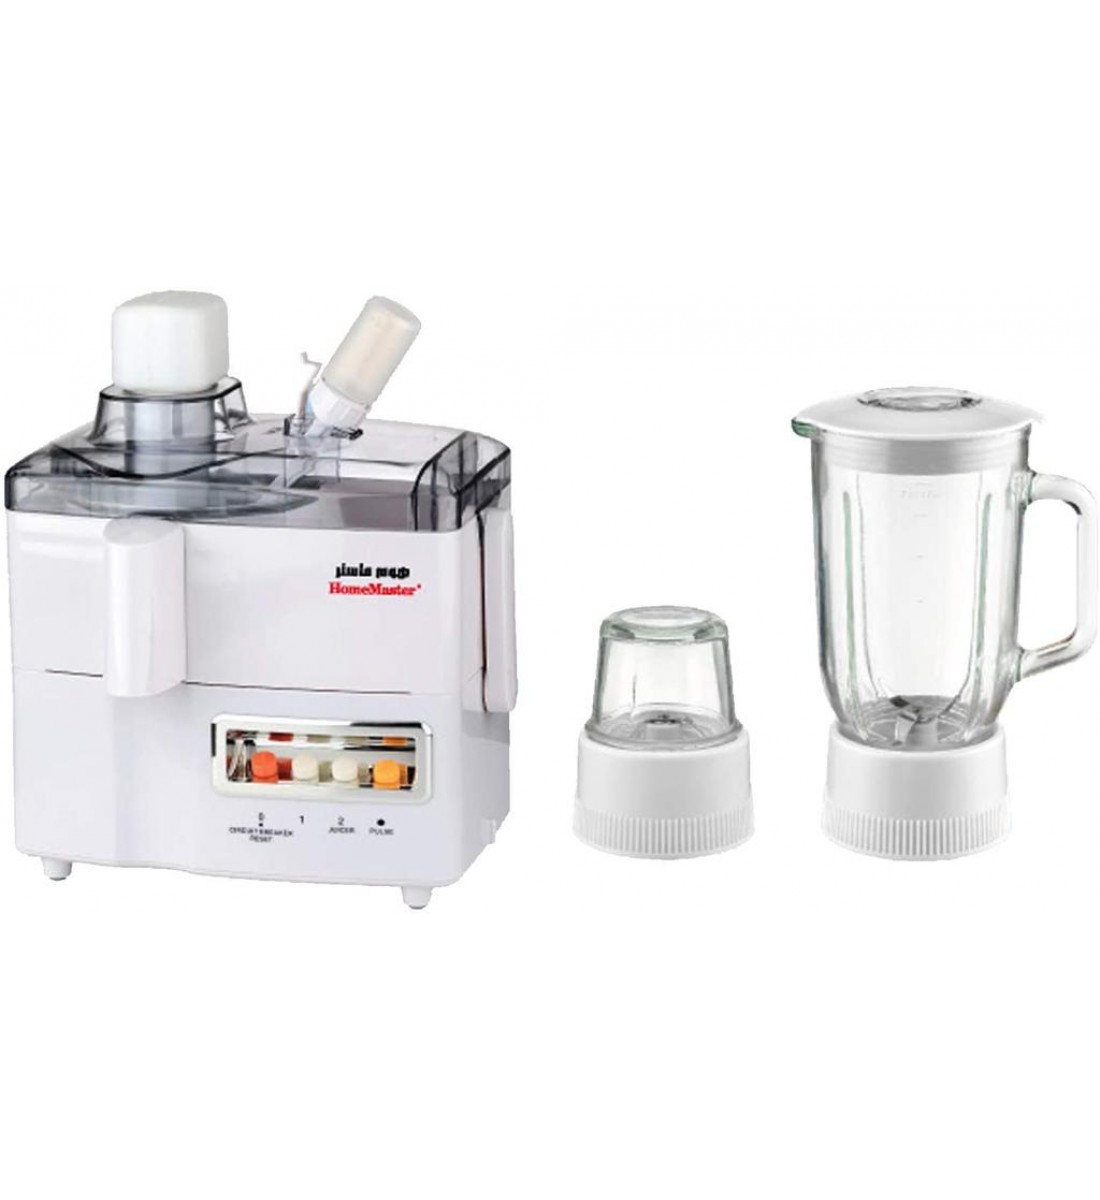 Home Master 3-in-1 Juice Blender HM-176, White / Clear